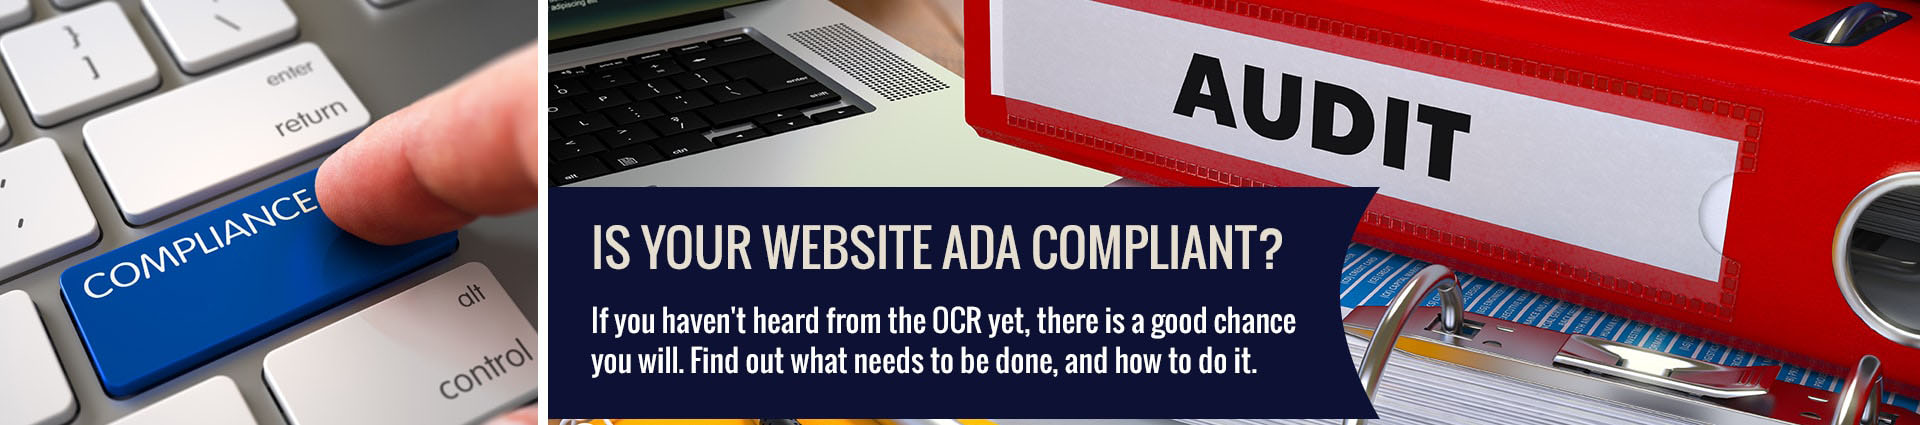 Is your website ADA compliant? If you haven't heard from OCR yet, there is a good chance you will. Find out what needs to be done, and how to do it.